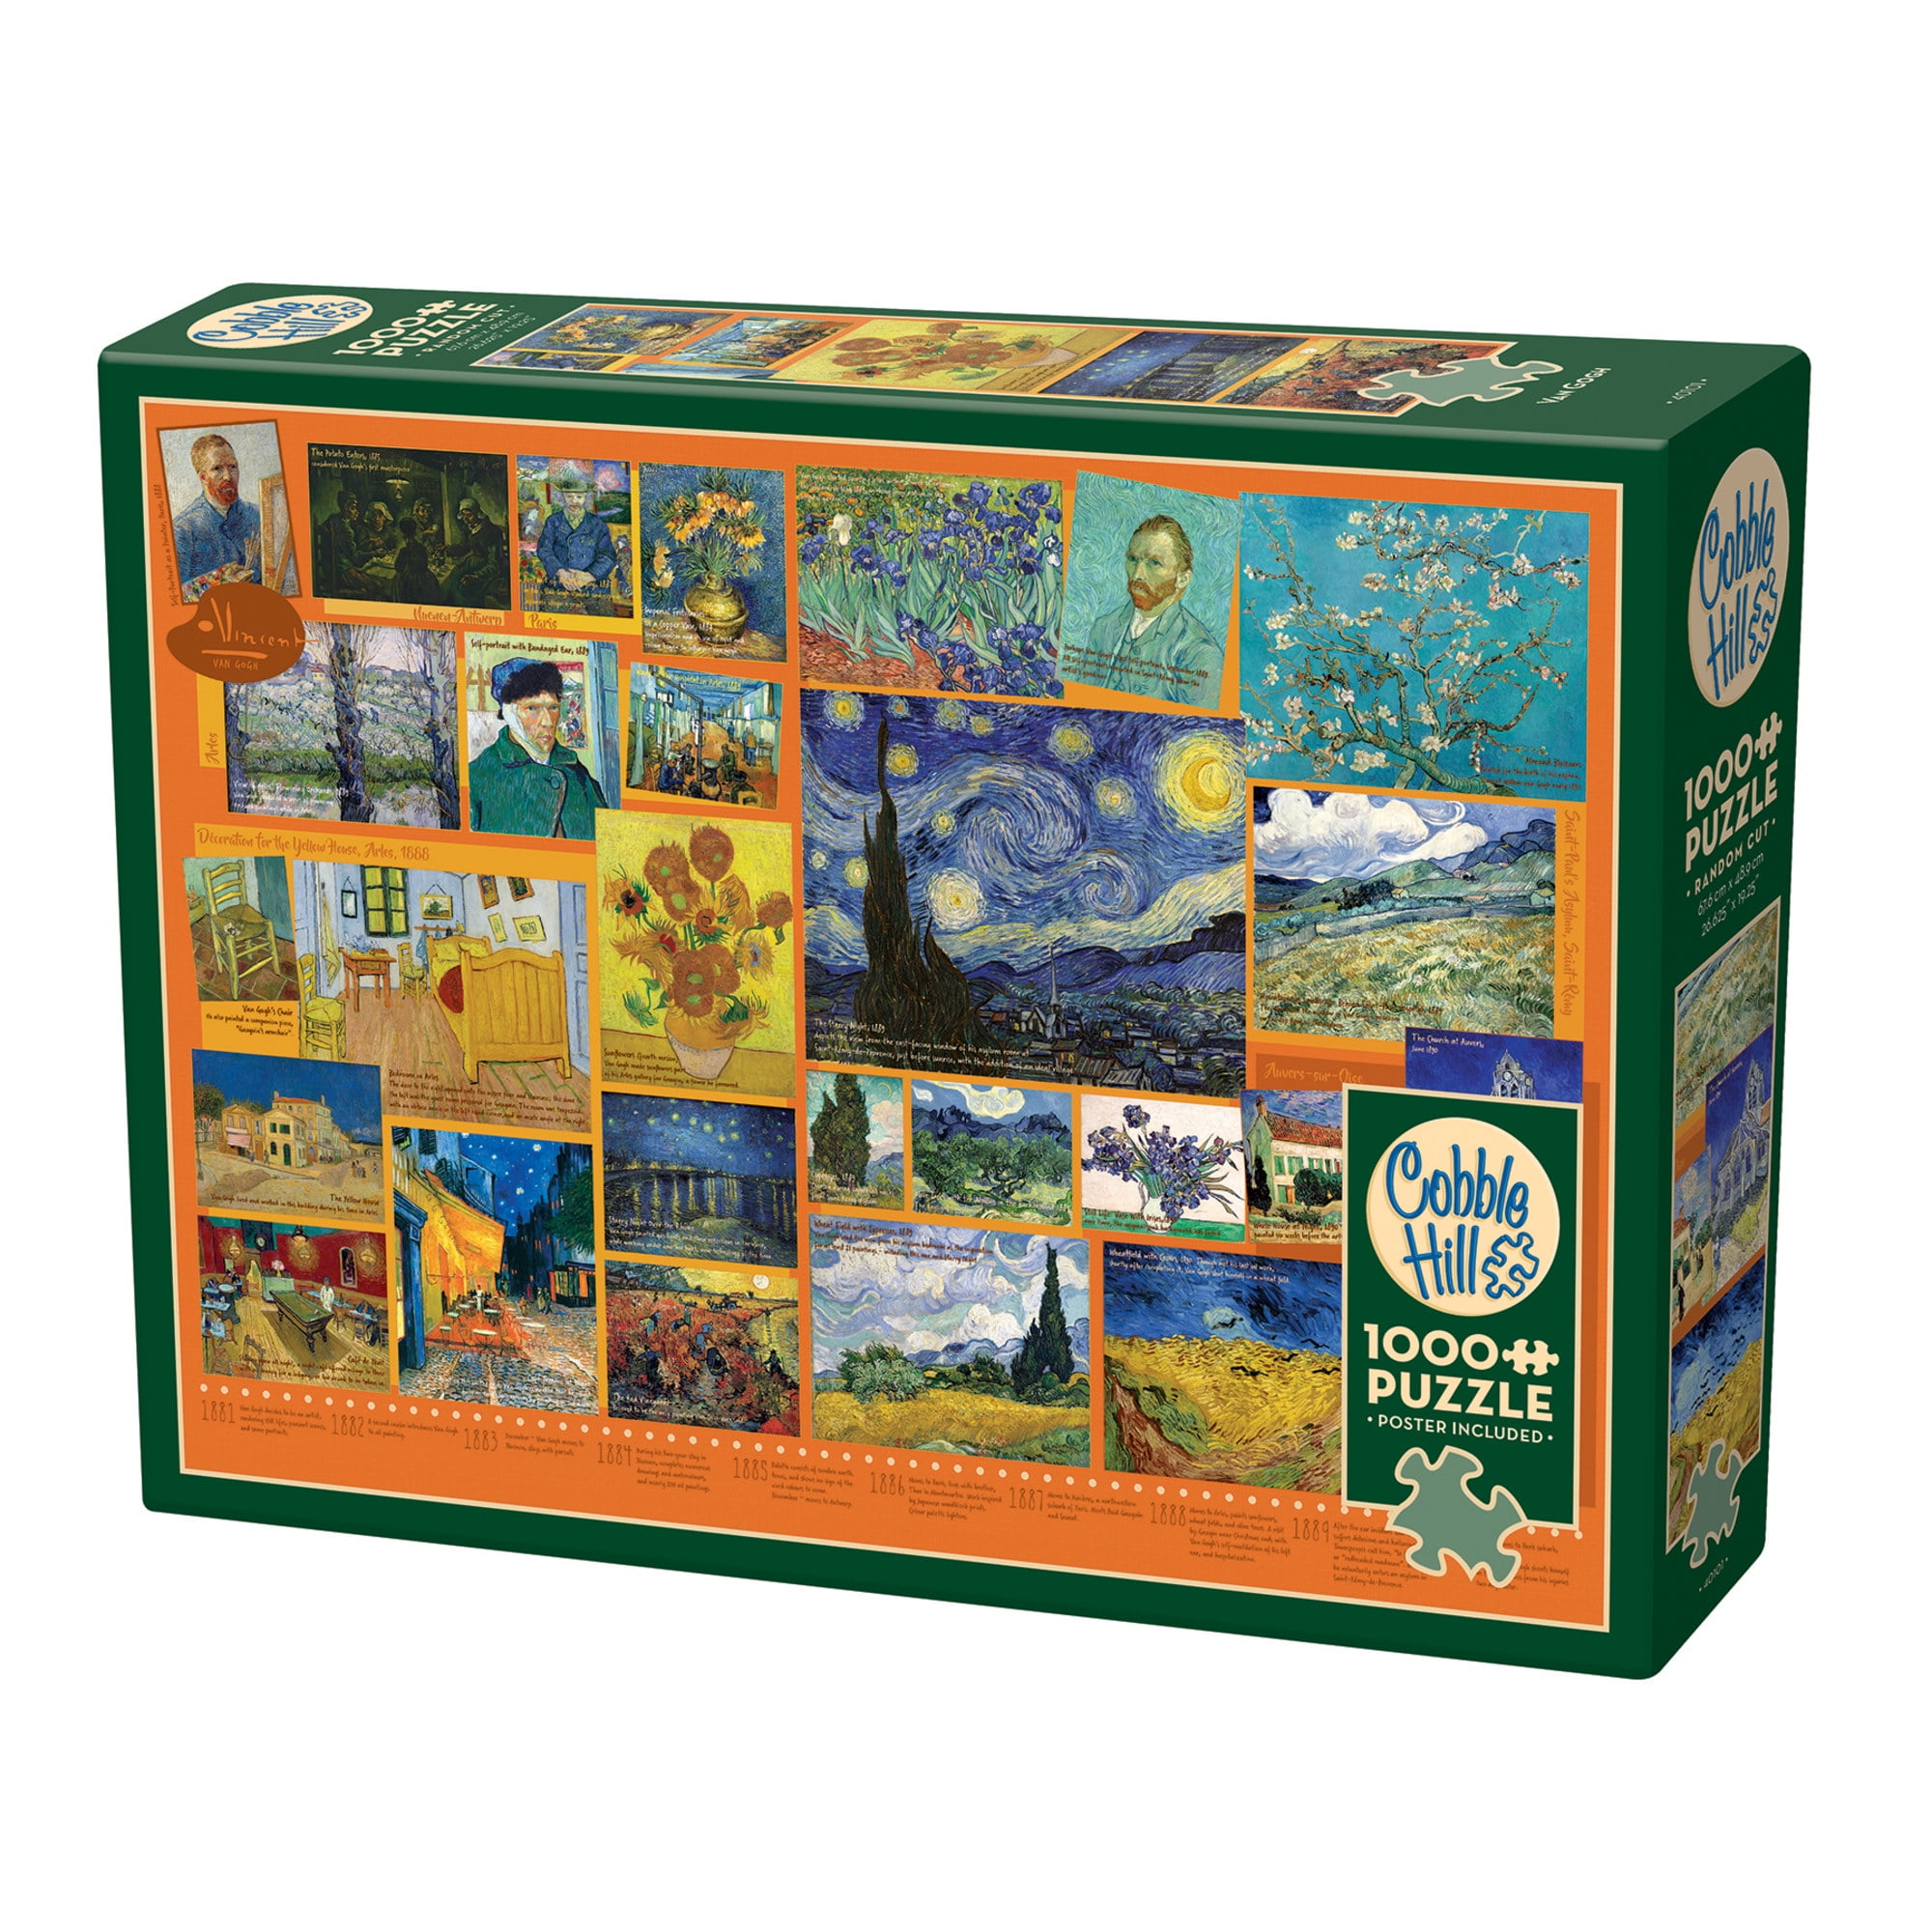 Cobble Hill 1000 Piece Puzzle: Van Gogh - Reference Poster Included, High  Quality Jigsaw, Earth Friendly Materials 